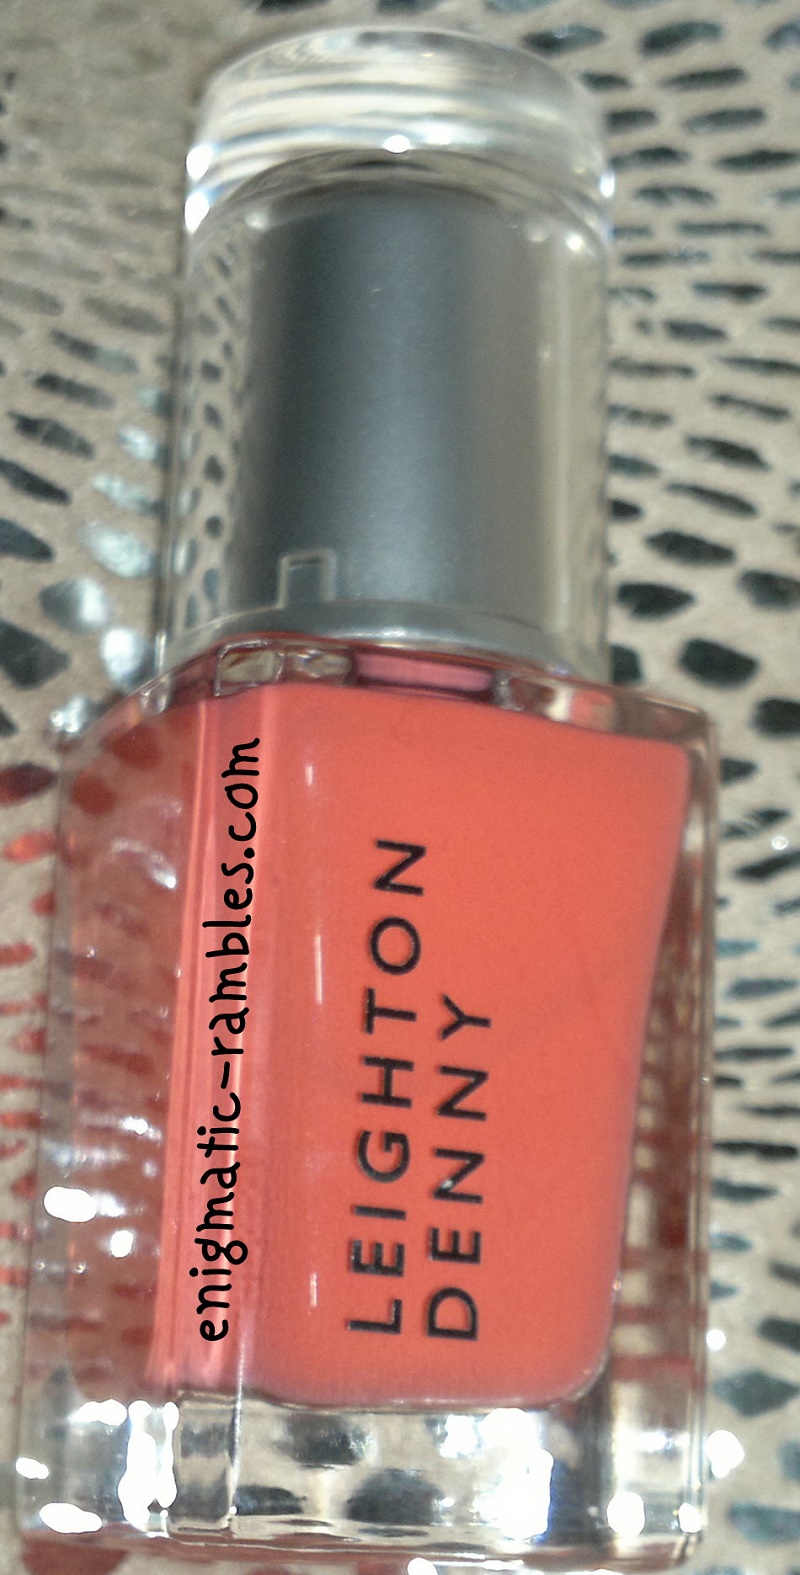 Leighton-Denny-qvc-8-Piece-Ultra-Glam-Collection-and-Bag-swatches-swatch-review-bon-voyage